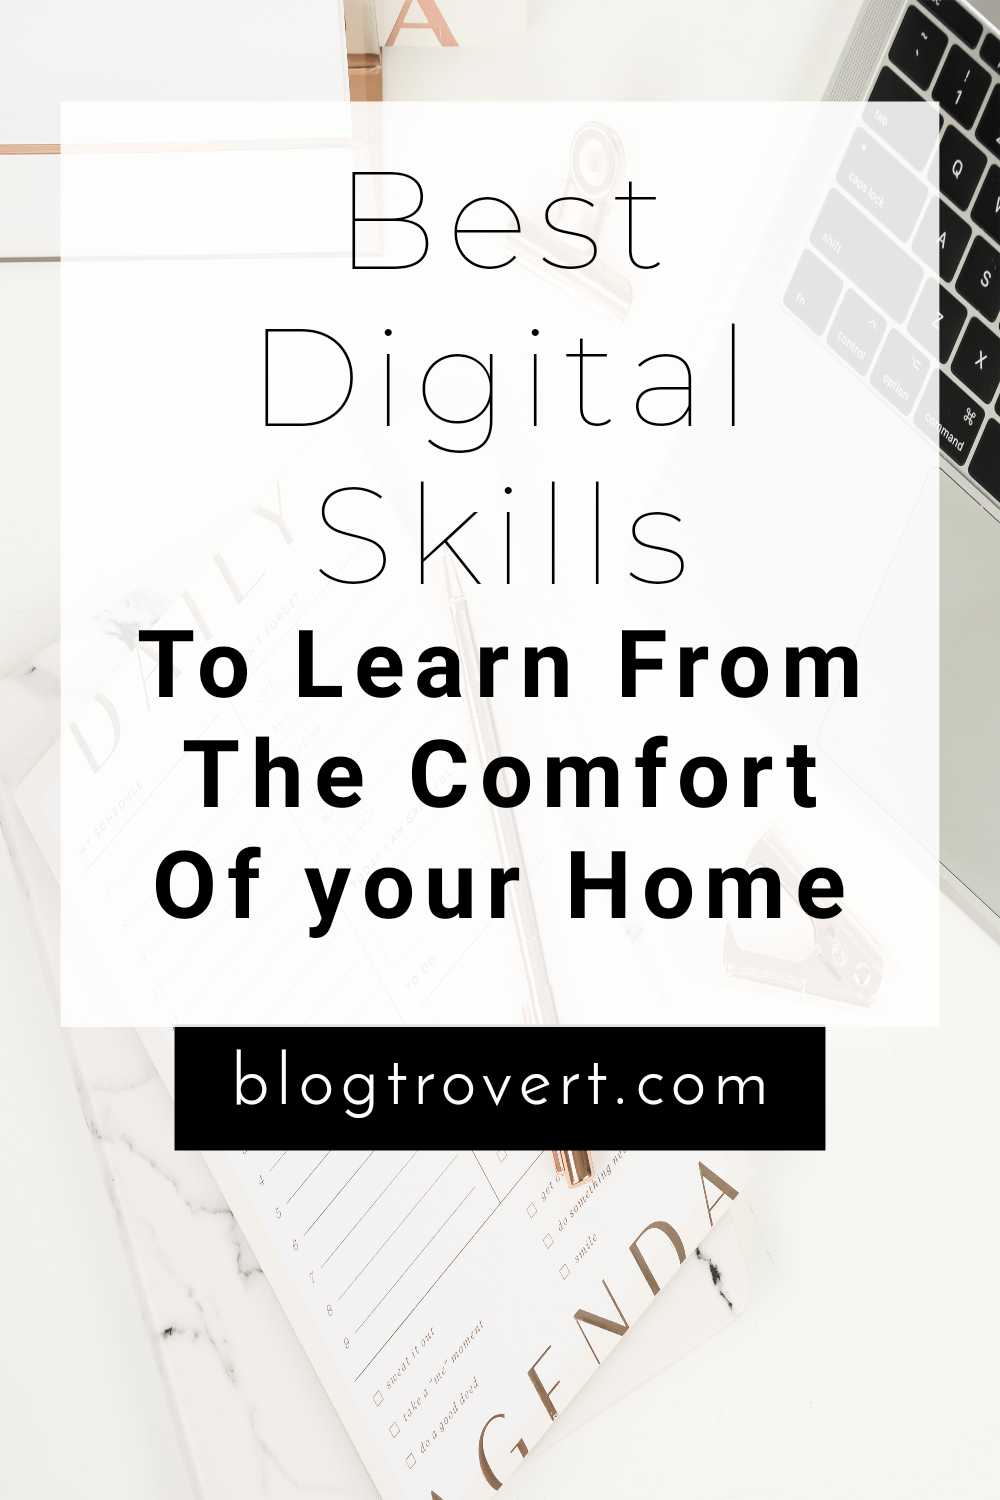 5 of the Best Digital Skills and Where to Learn Them 1